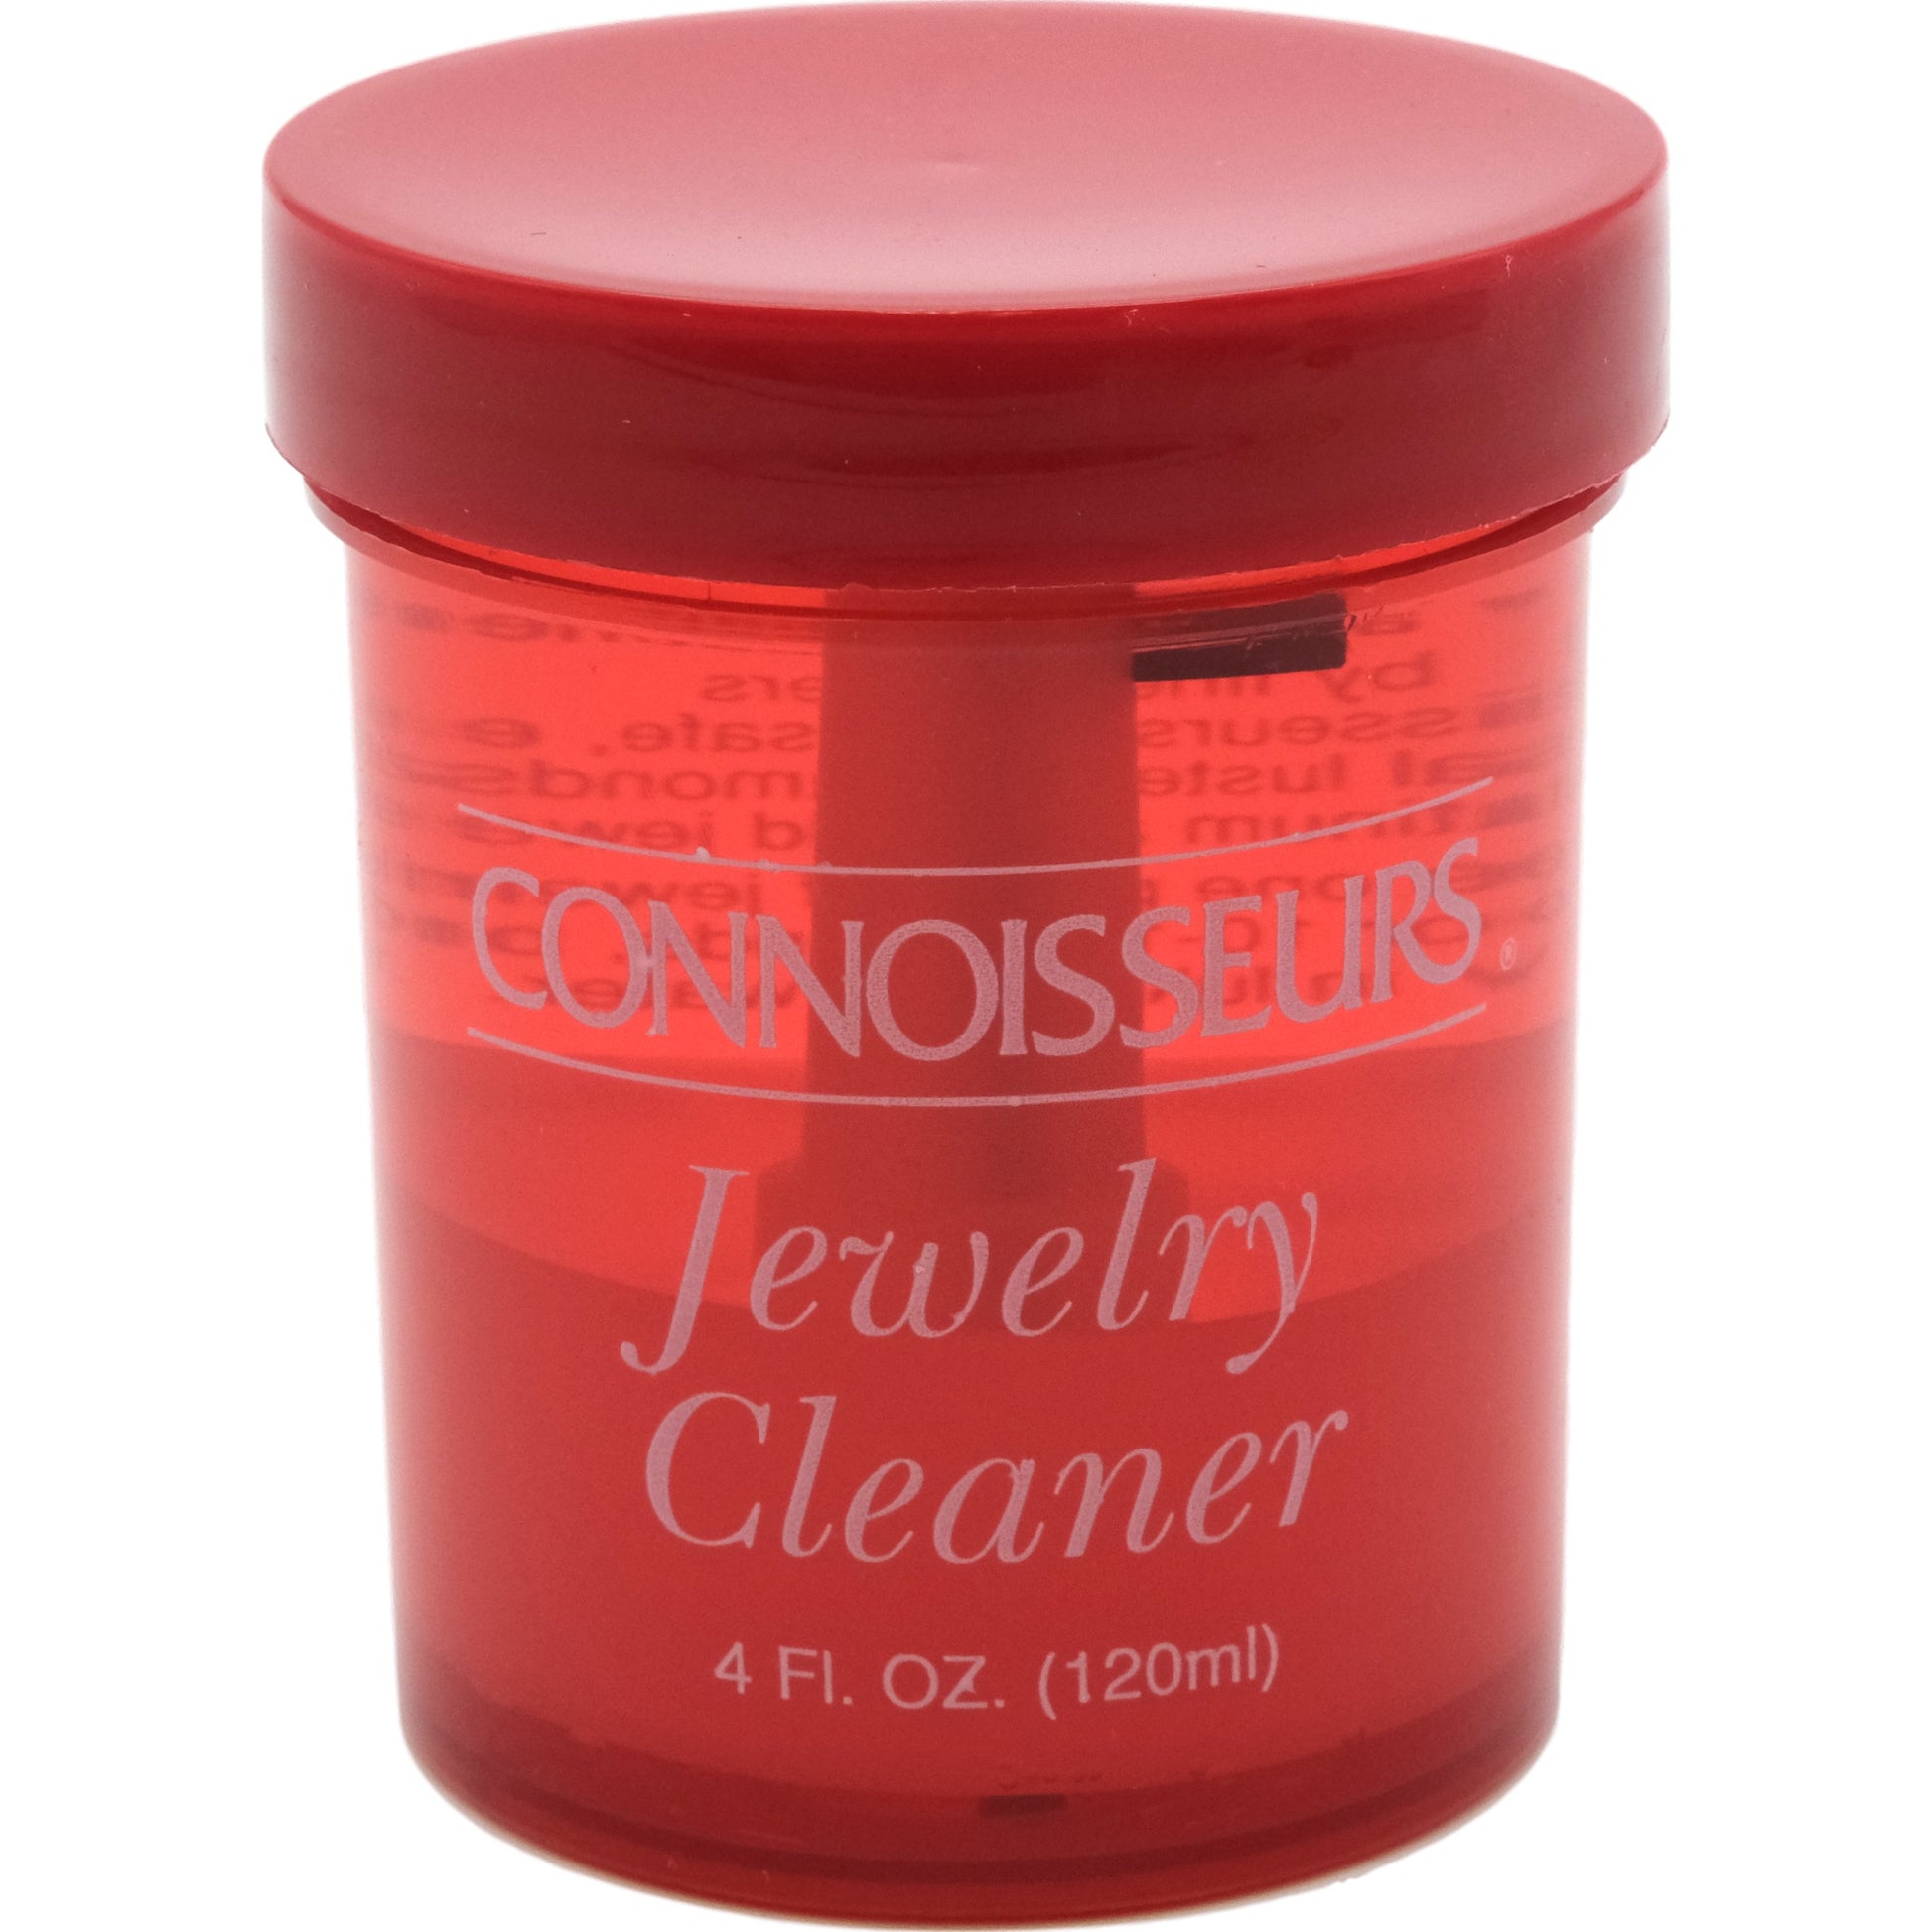 Connoisseurs Jewelry Cleaner, Silver - 7 fl oz